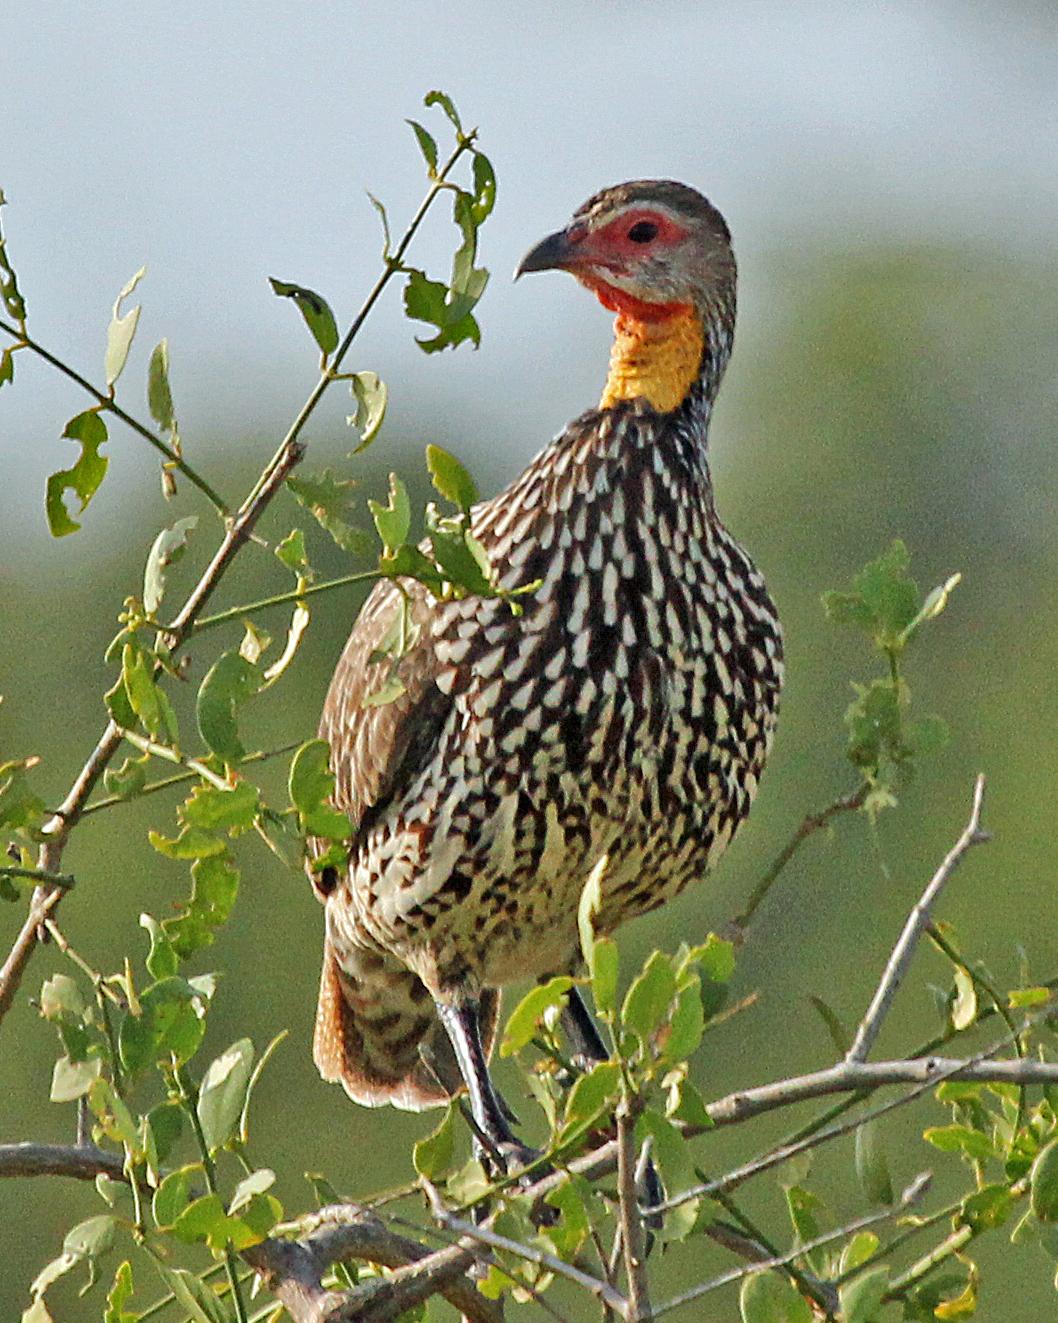 Yellow-necked Francolin Photo by Robert Polkinghorn